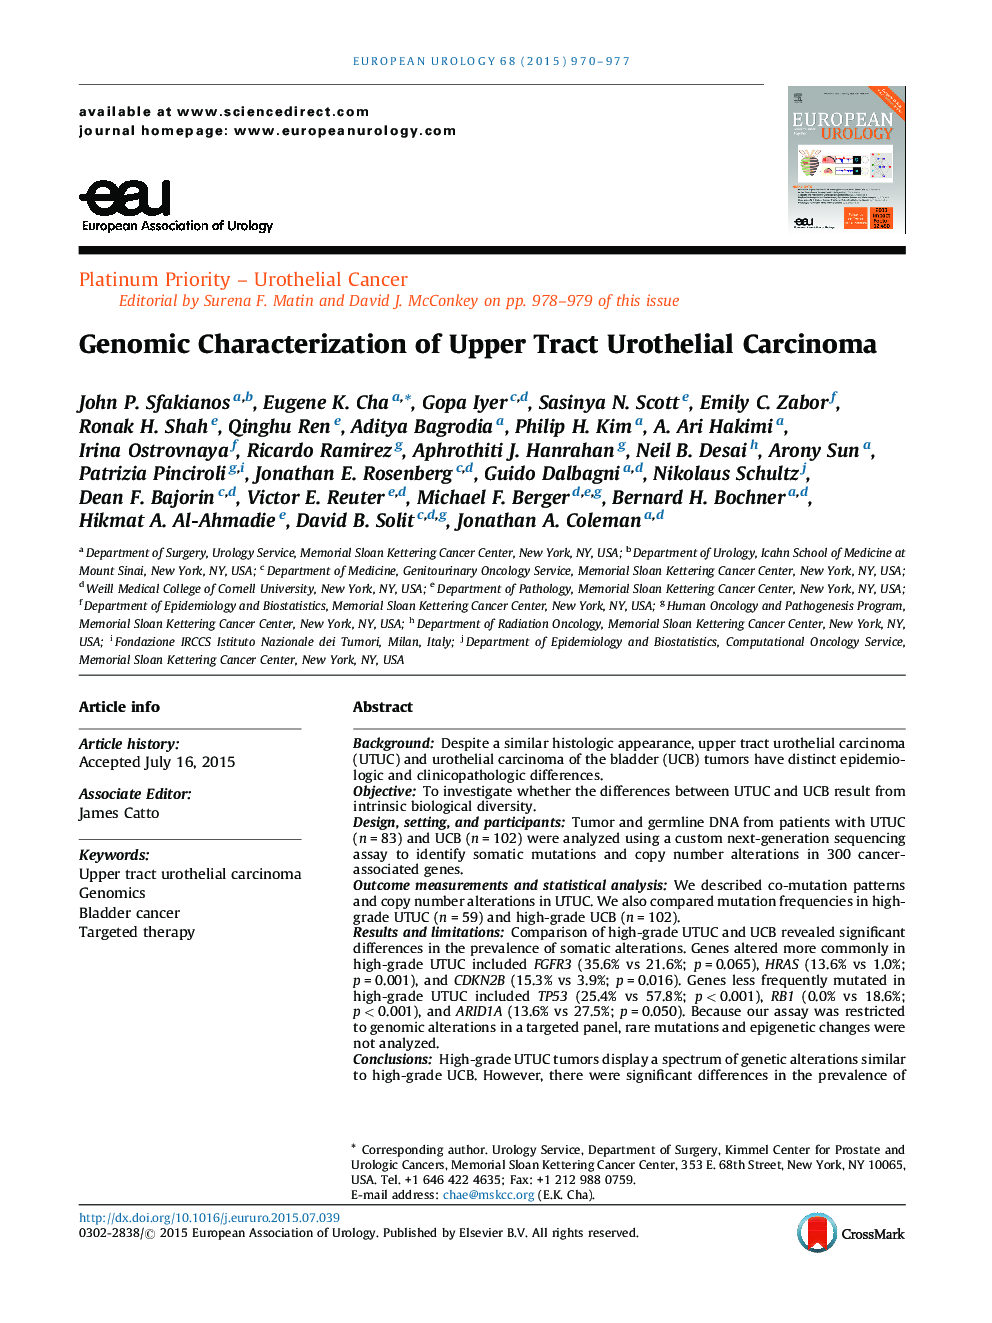 Genomic Characterization of Upper Tract Urothelial Carcinoma